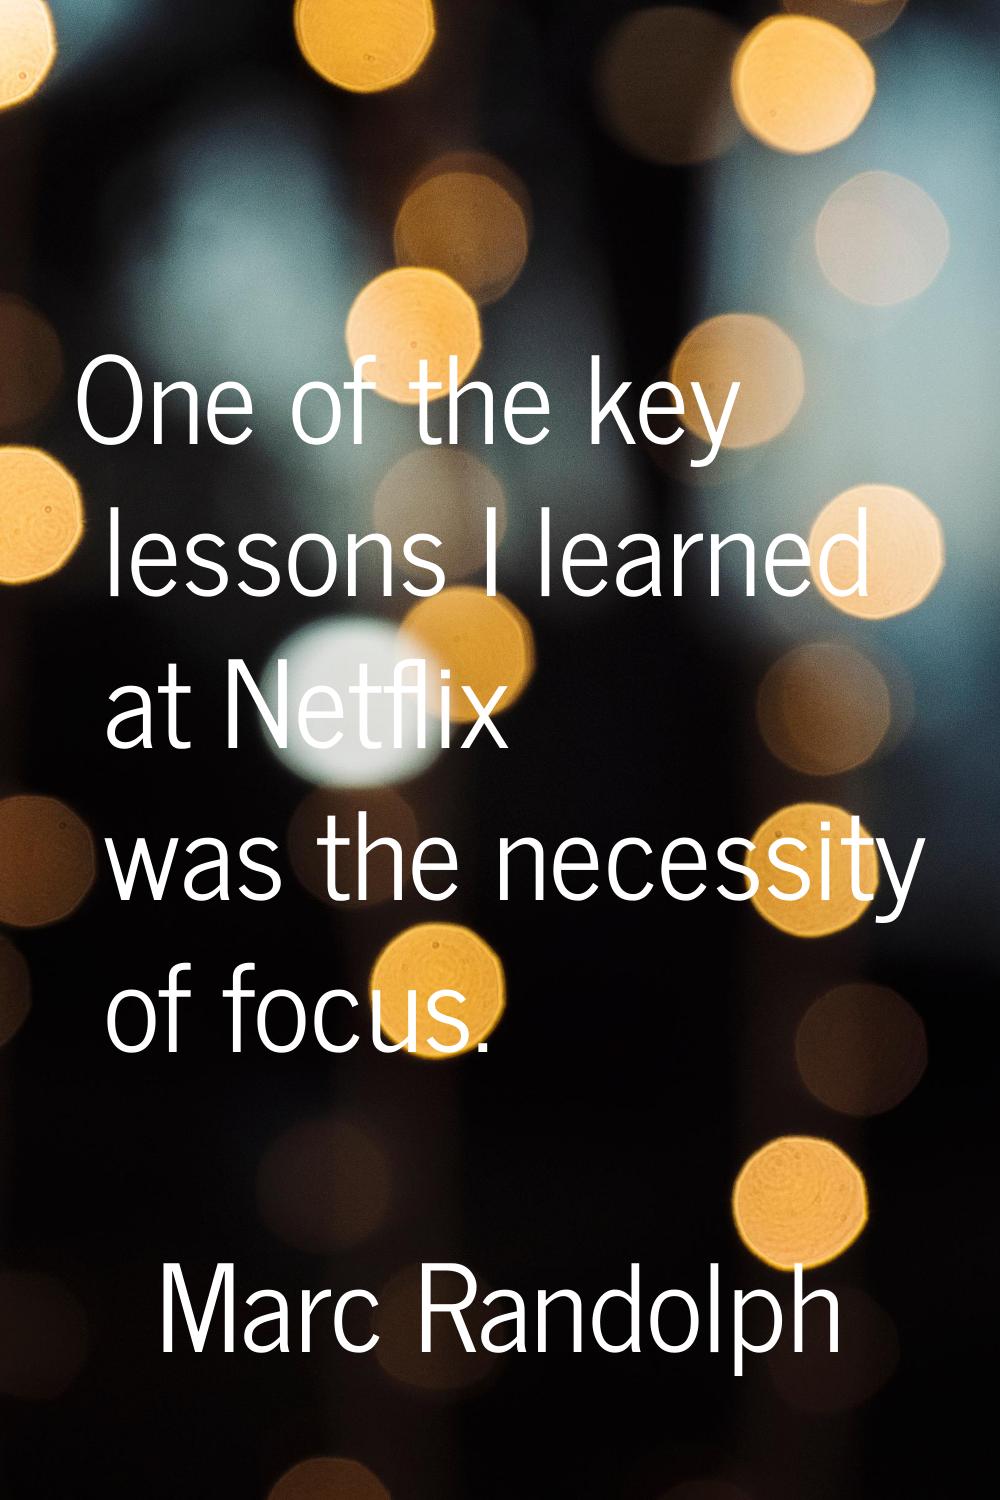 One of the key lessons I learned at Netflix was the necessity of focus.